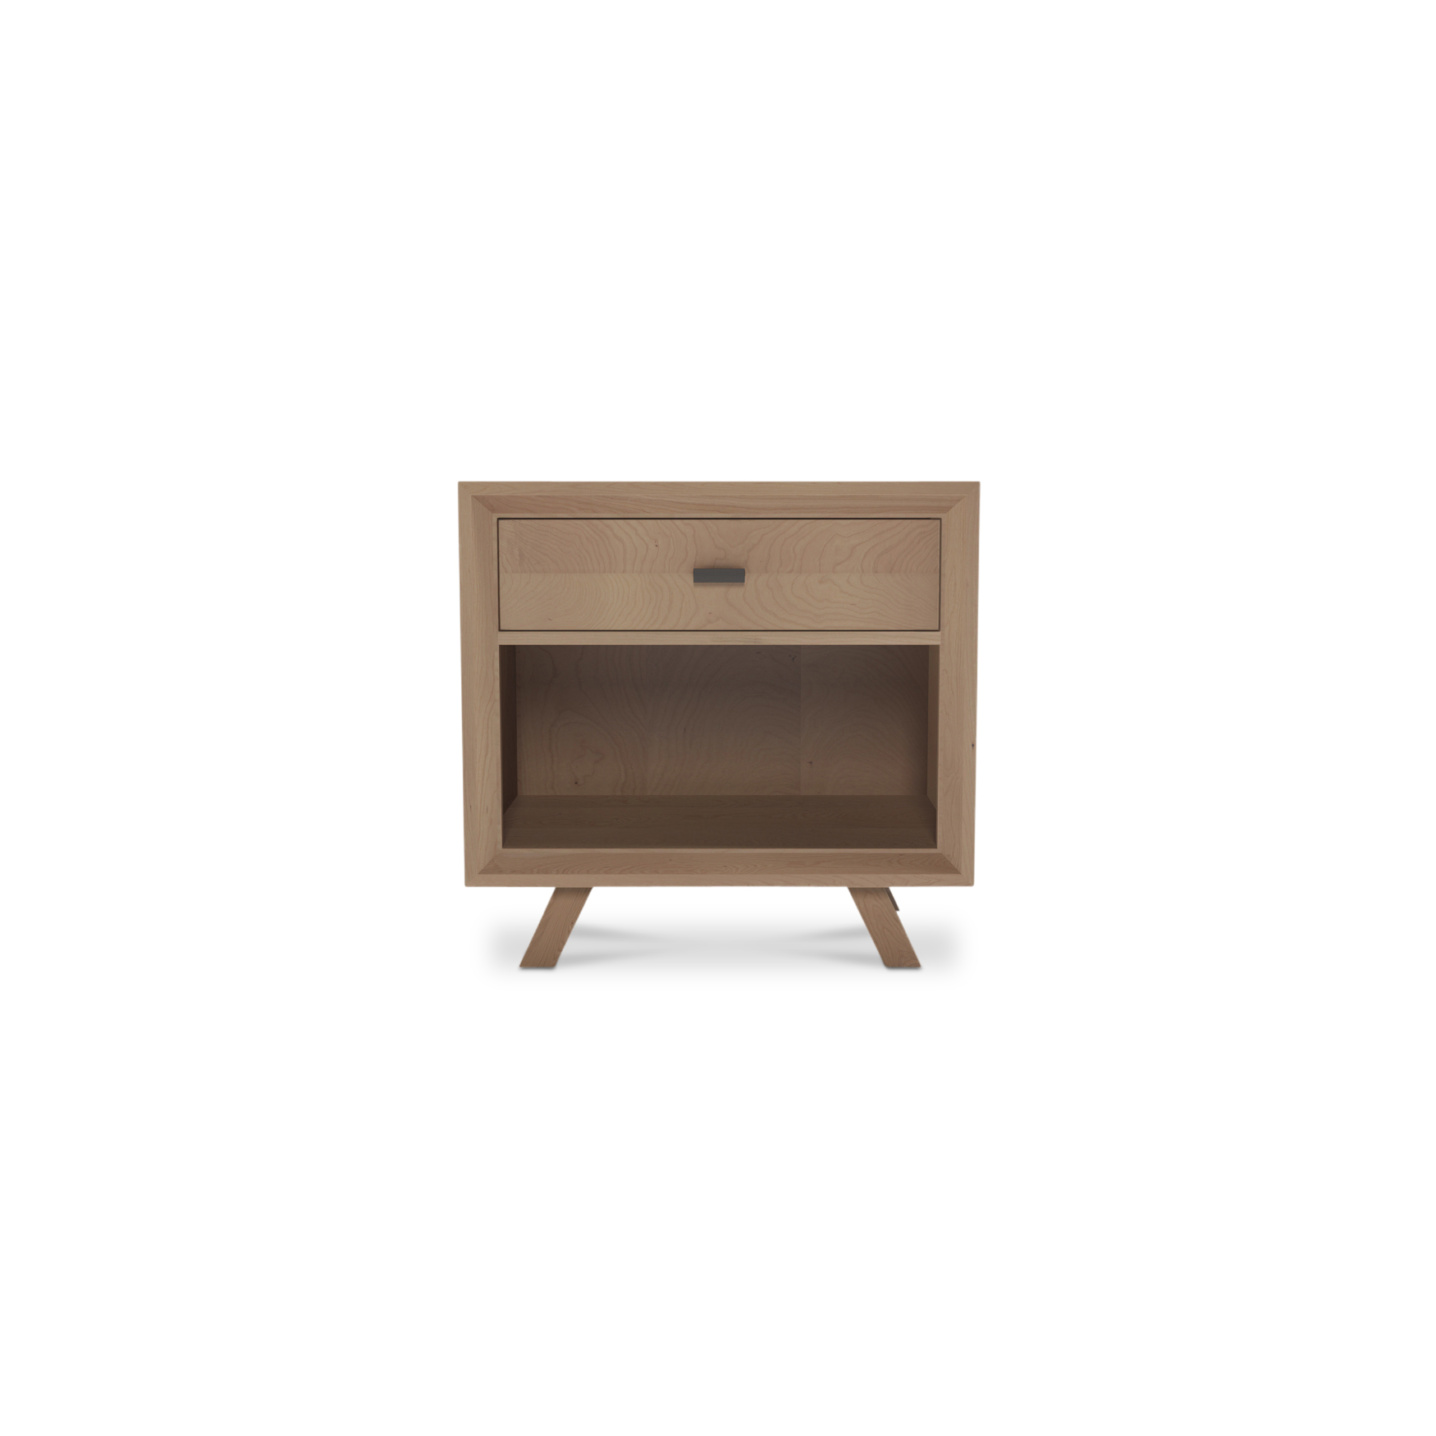 Solid cherry wood Scandinavian nightstand with one drawer